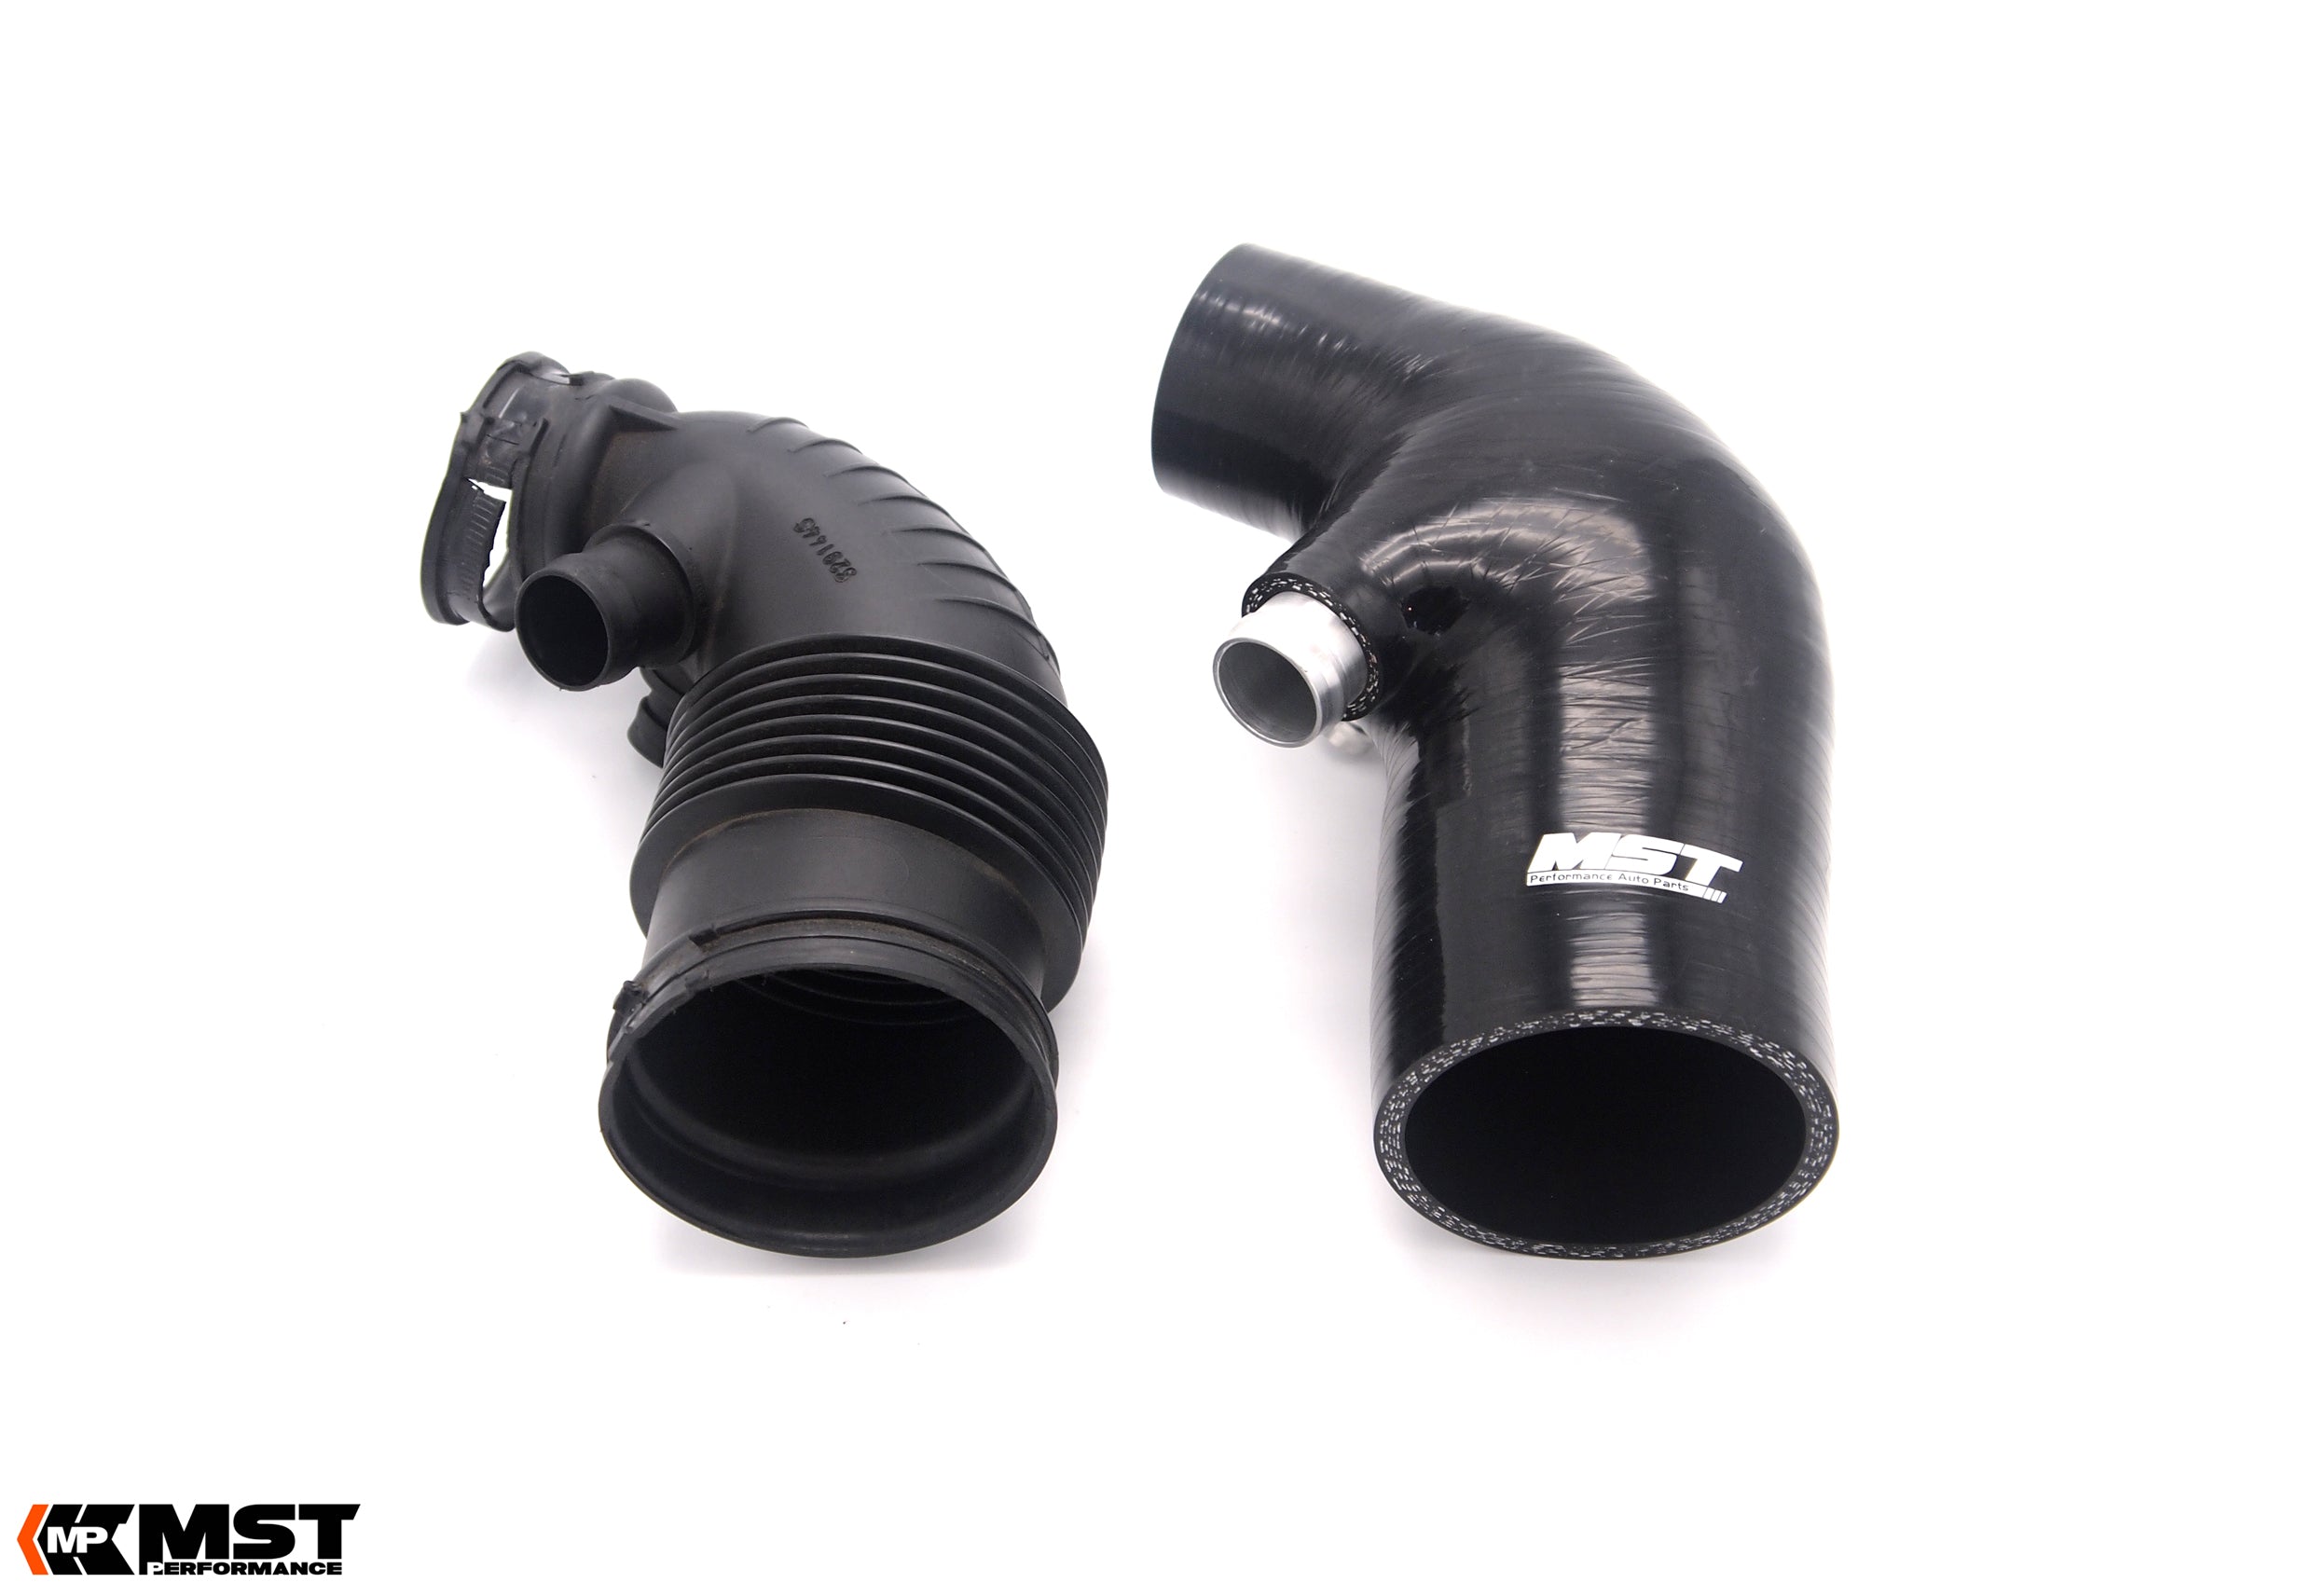 MST Performance  Turbo Inlet Hose for BMW N13 F20 F21 F30 F31) (BW-N1302) - MODE Auto Concepts